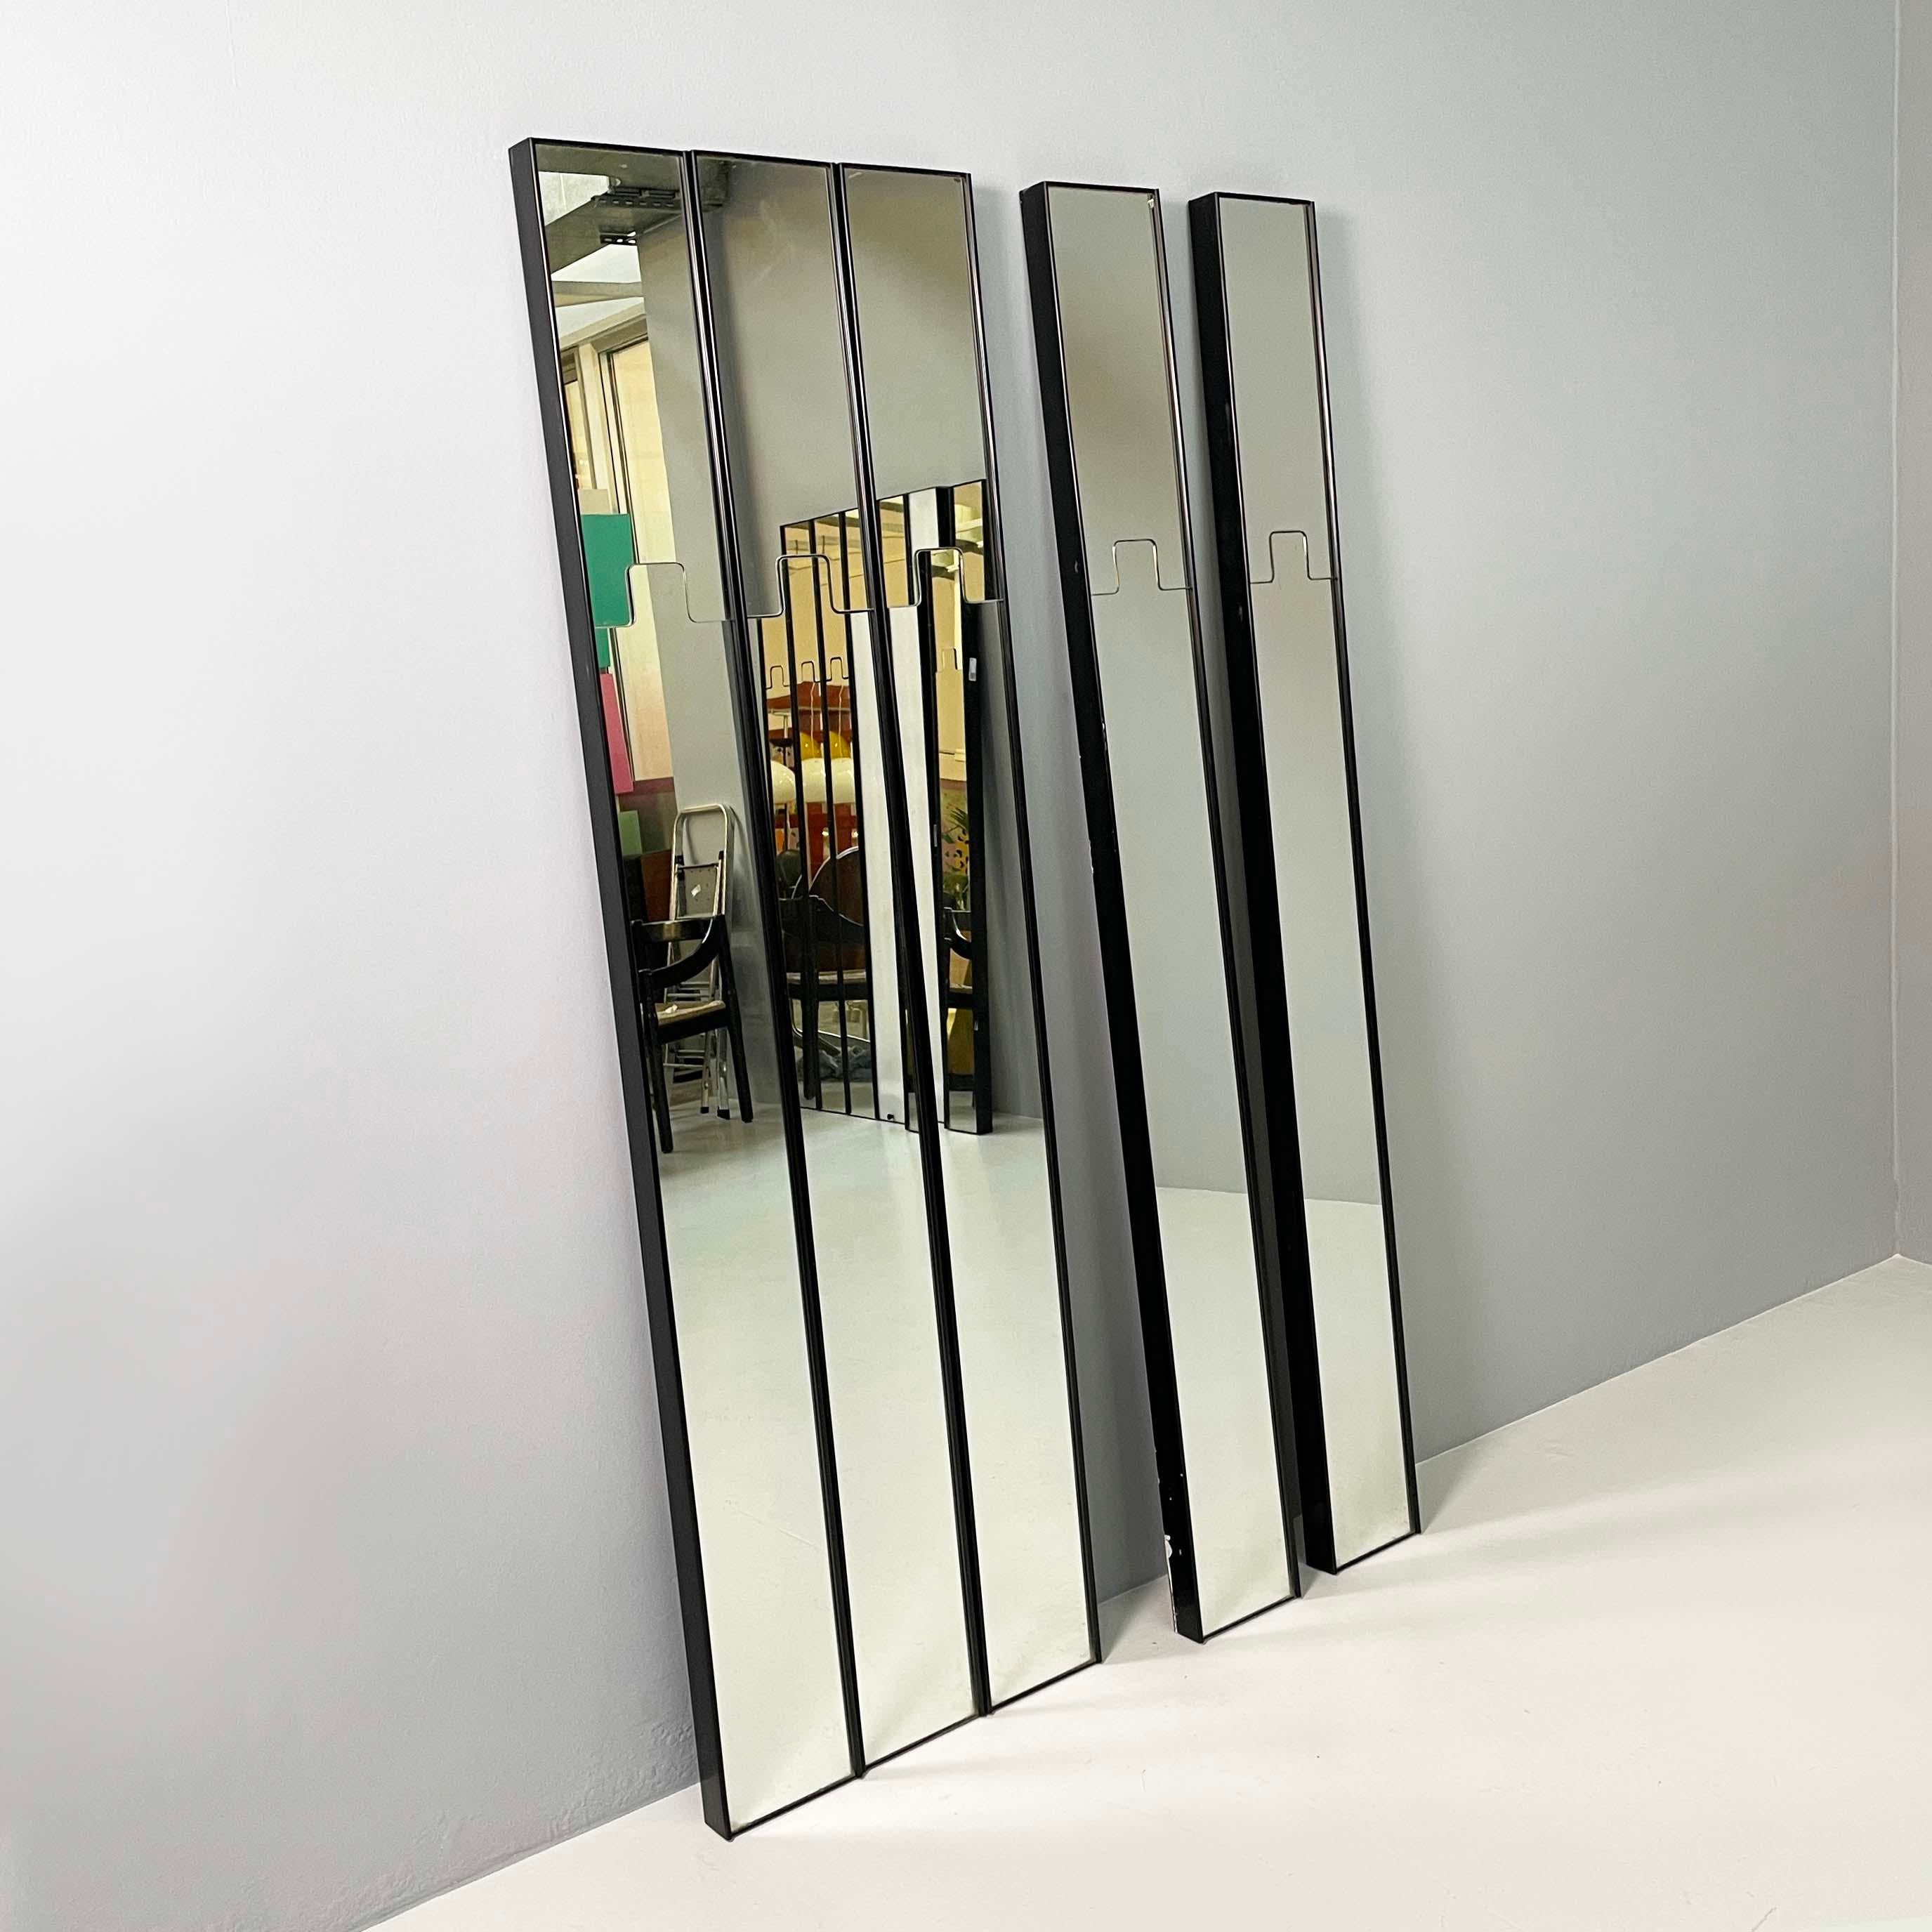 Italian modern wall mirror and coat hanger Gronda by Luciano Bertoncini for Elco, 1970s
Wall mirror mod. Gronda made up of 5 rectangular modules. The frame structure is made of black plastic. The peculiarity of this mirror is that it has a